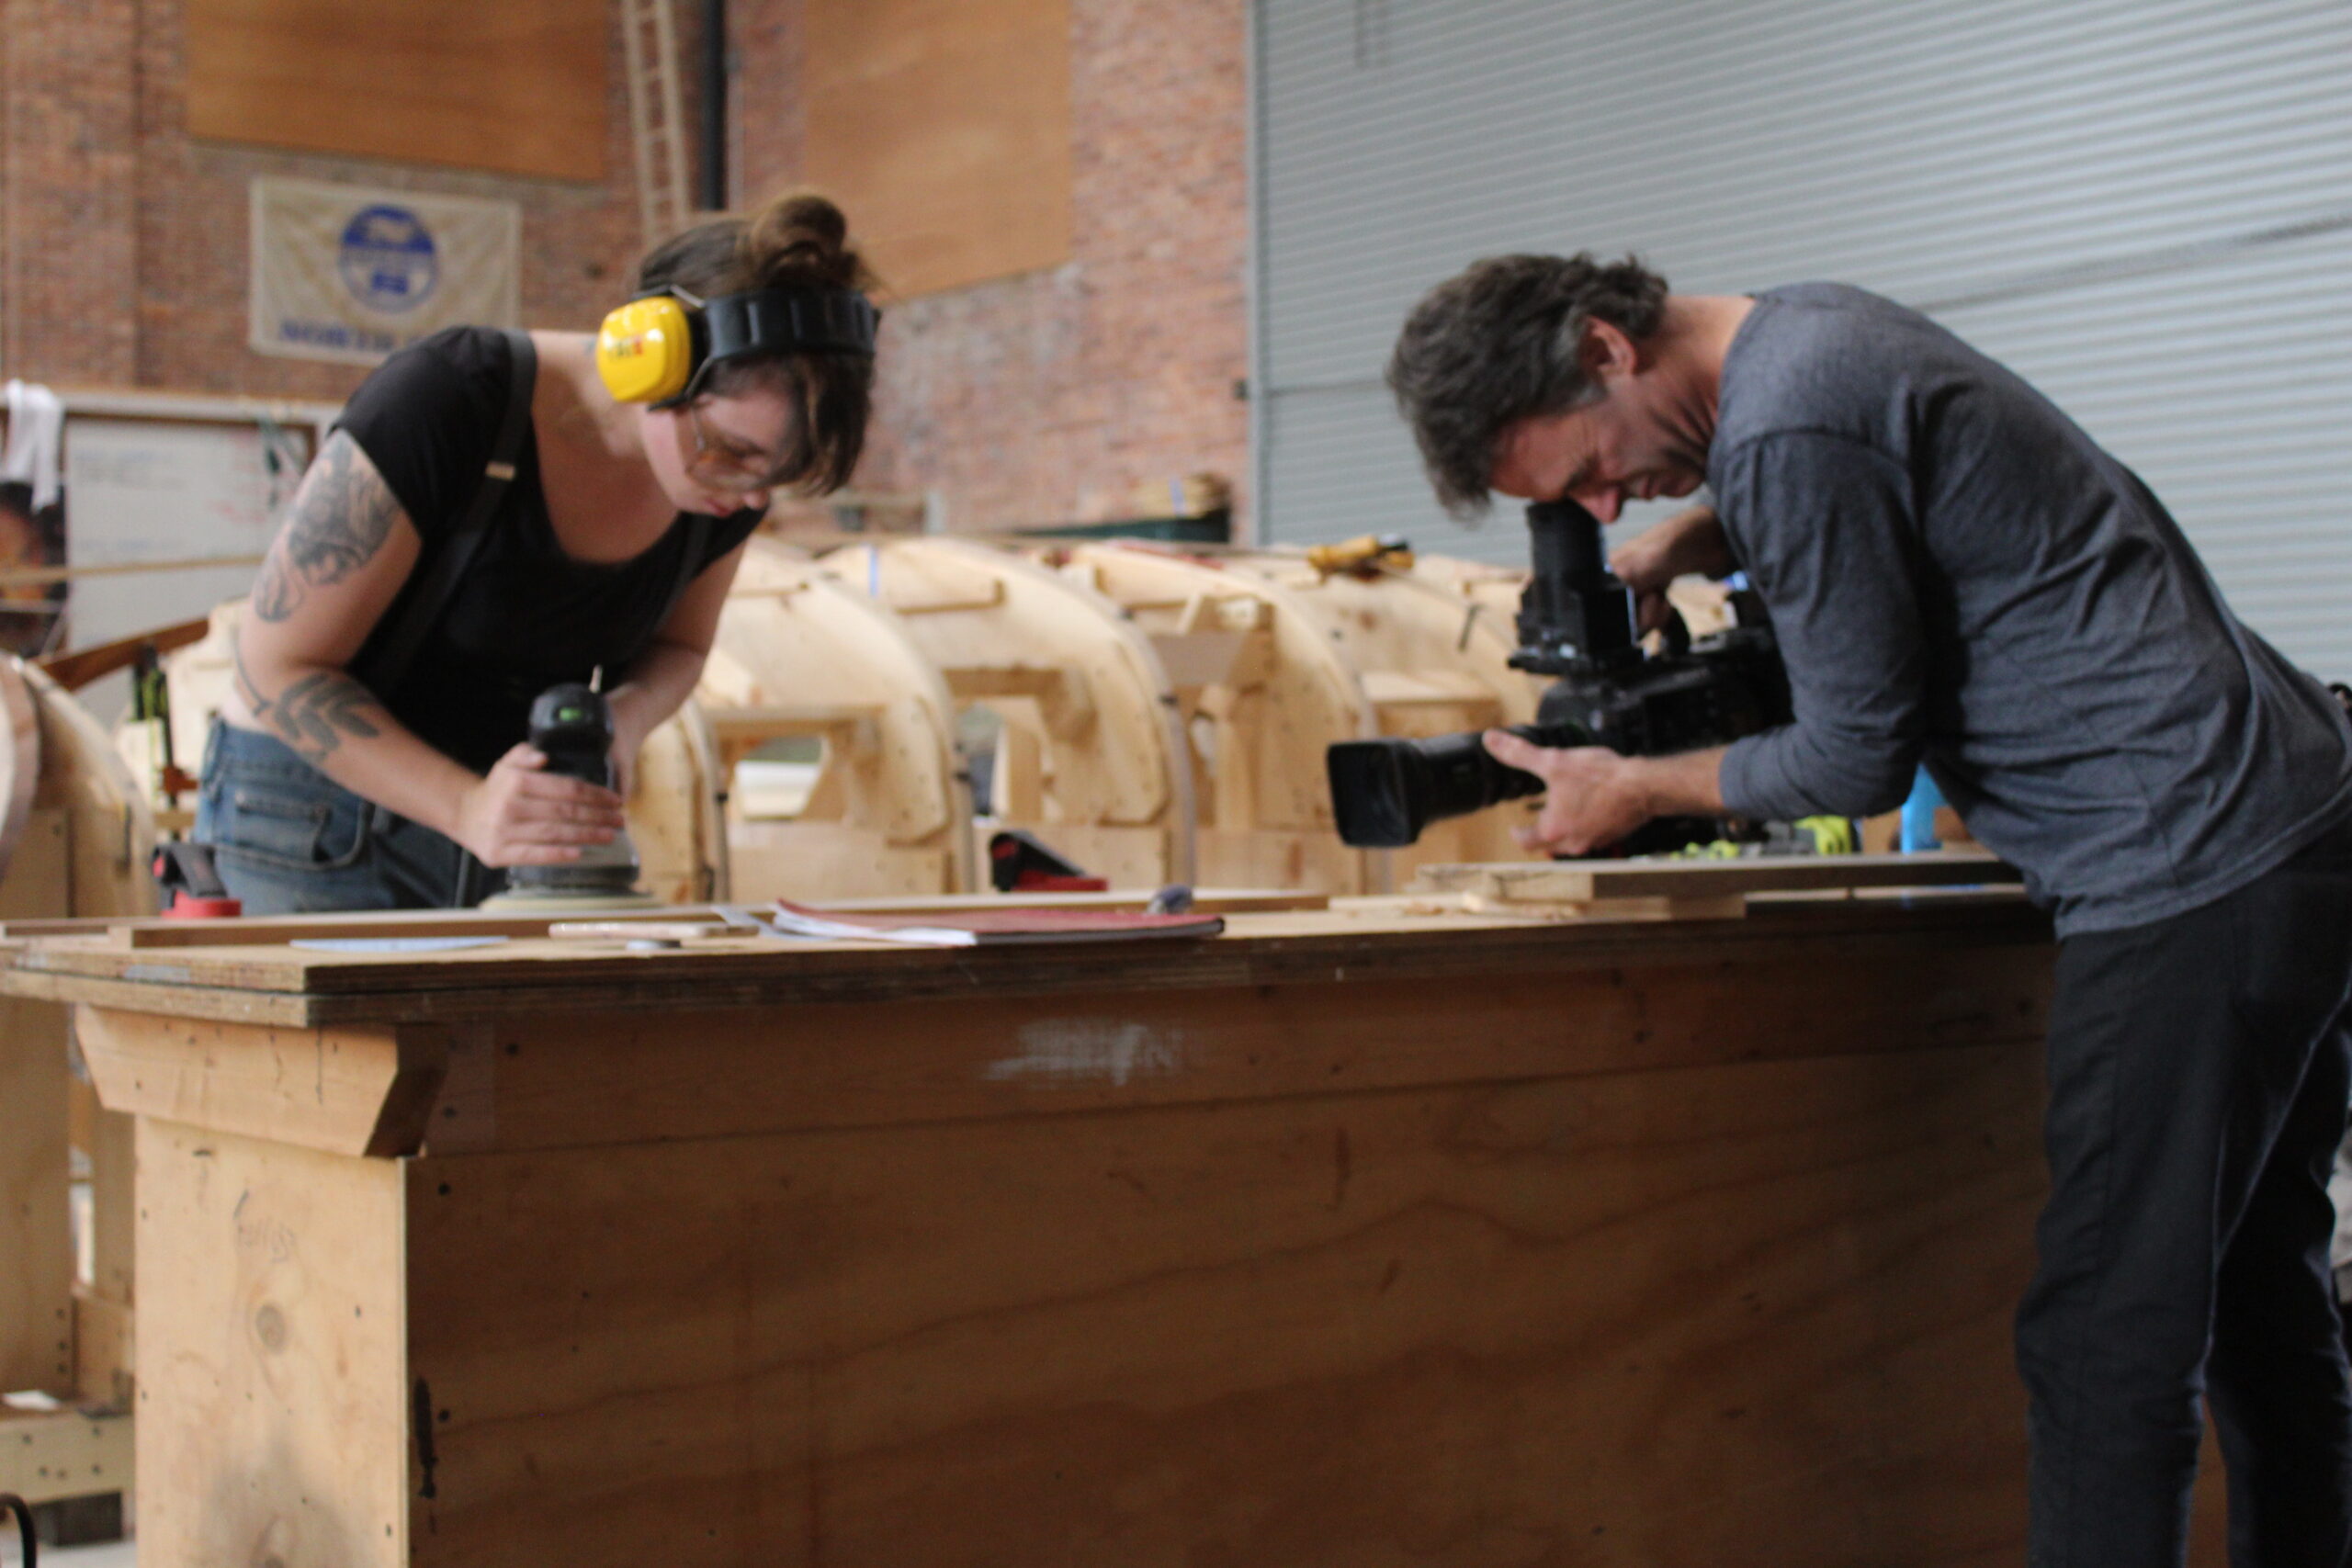 The Boatbuilders: A 5 Episode Docuseries on Boatbuilding in the Northeast